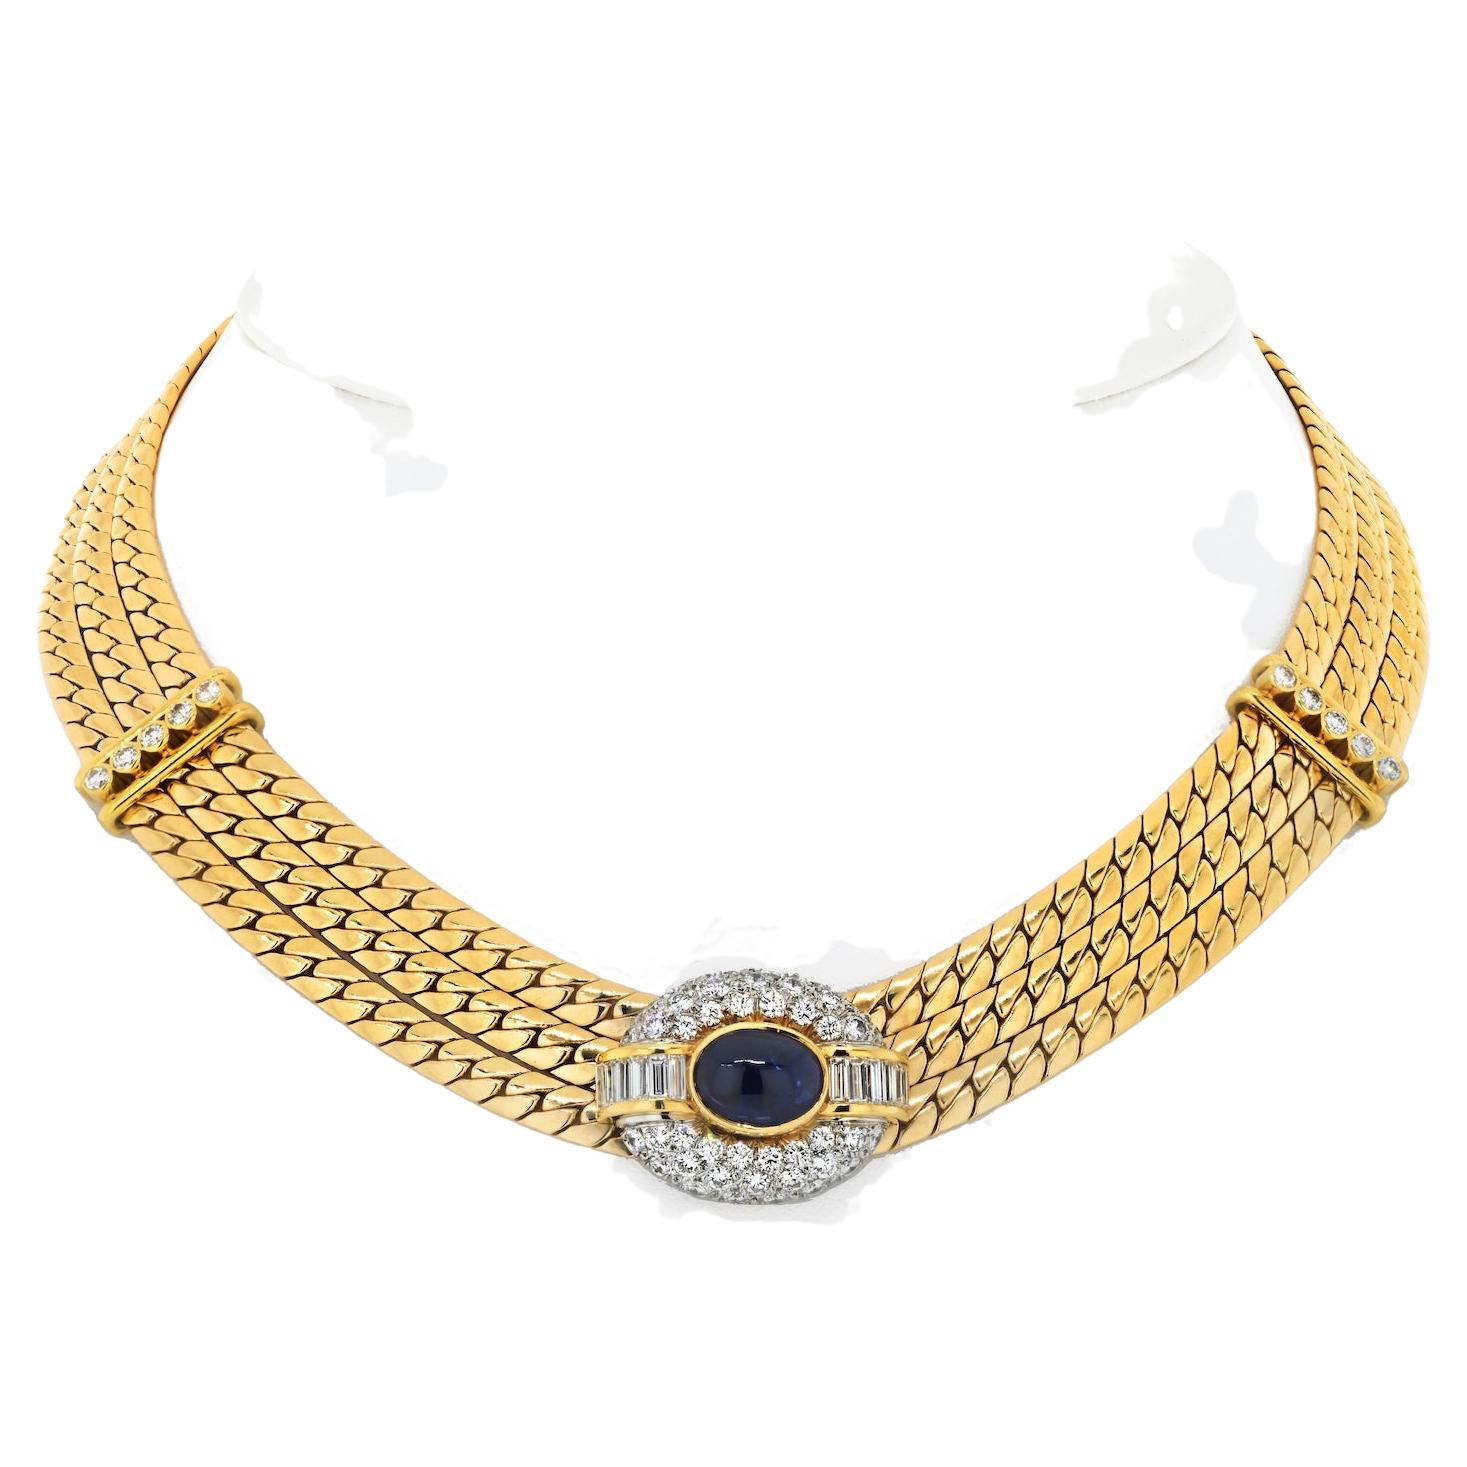 Van Cleef & Arpels 18k Yellow Gold Diamond and Sapphire Three Strand Necklace